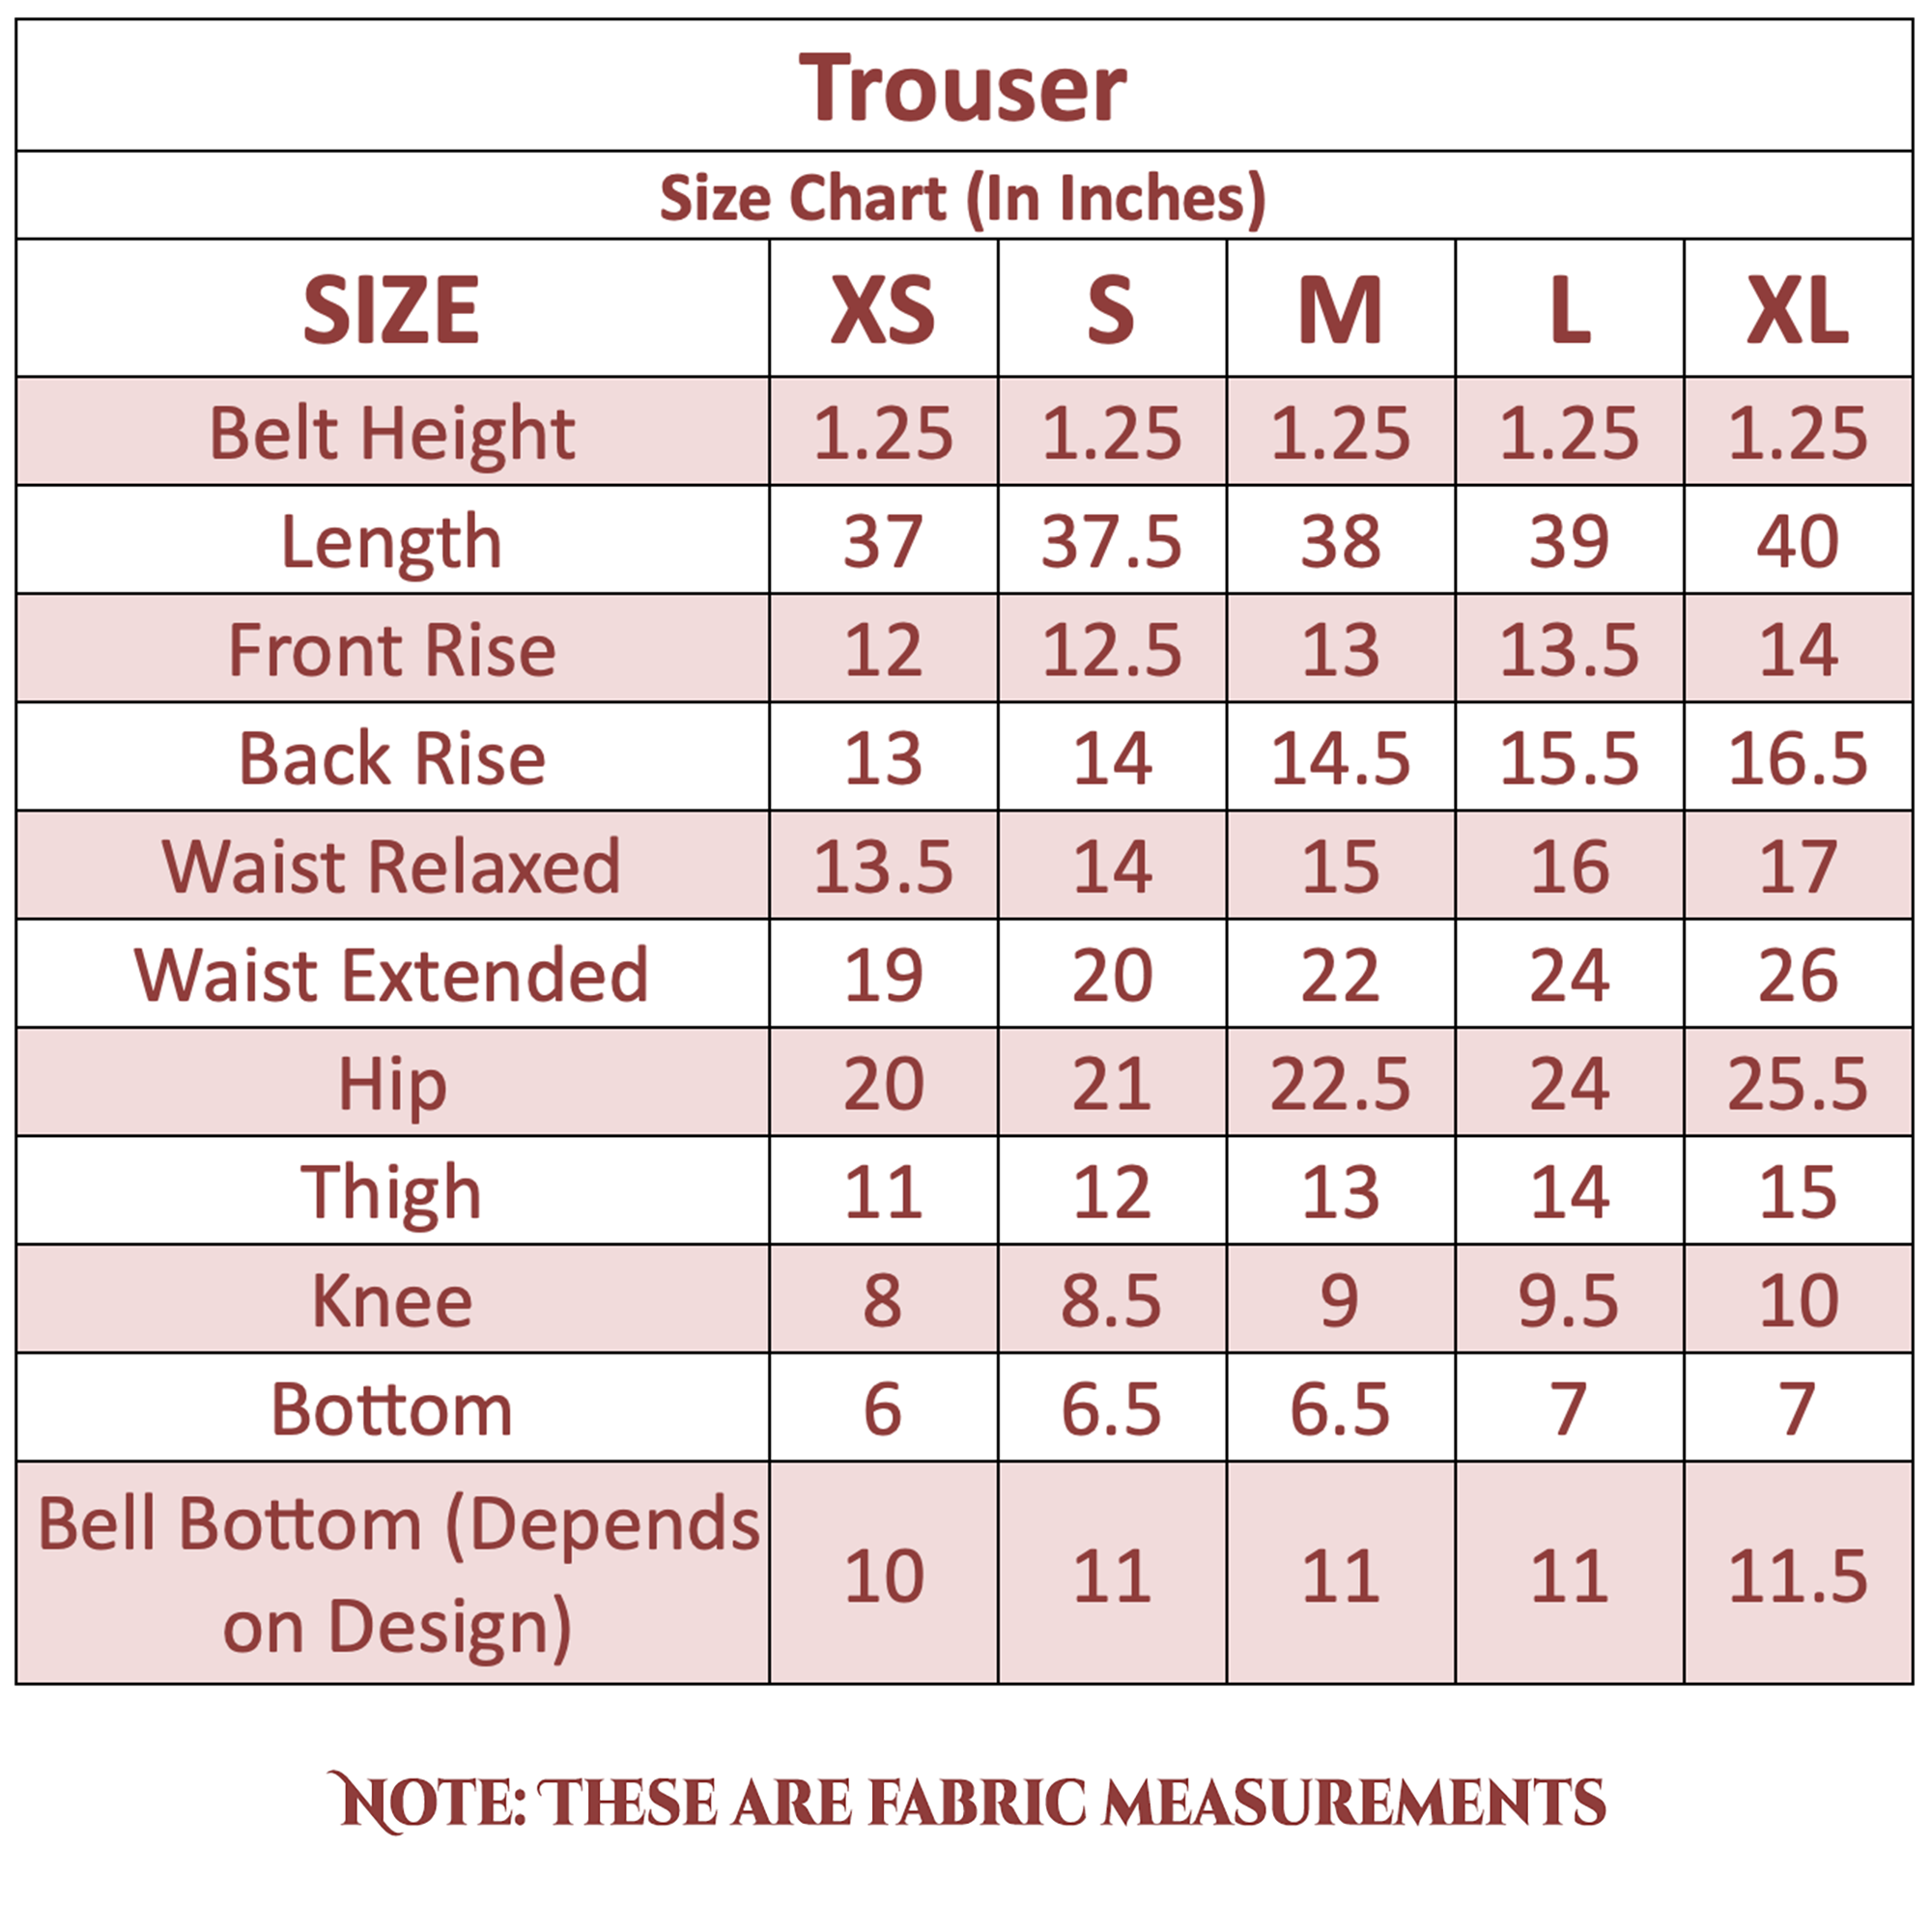 How to sew a trouser step by step? - Legit.ng